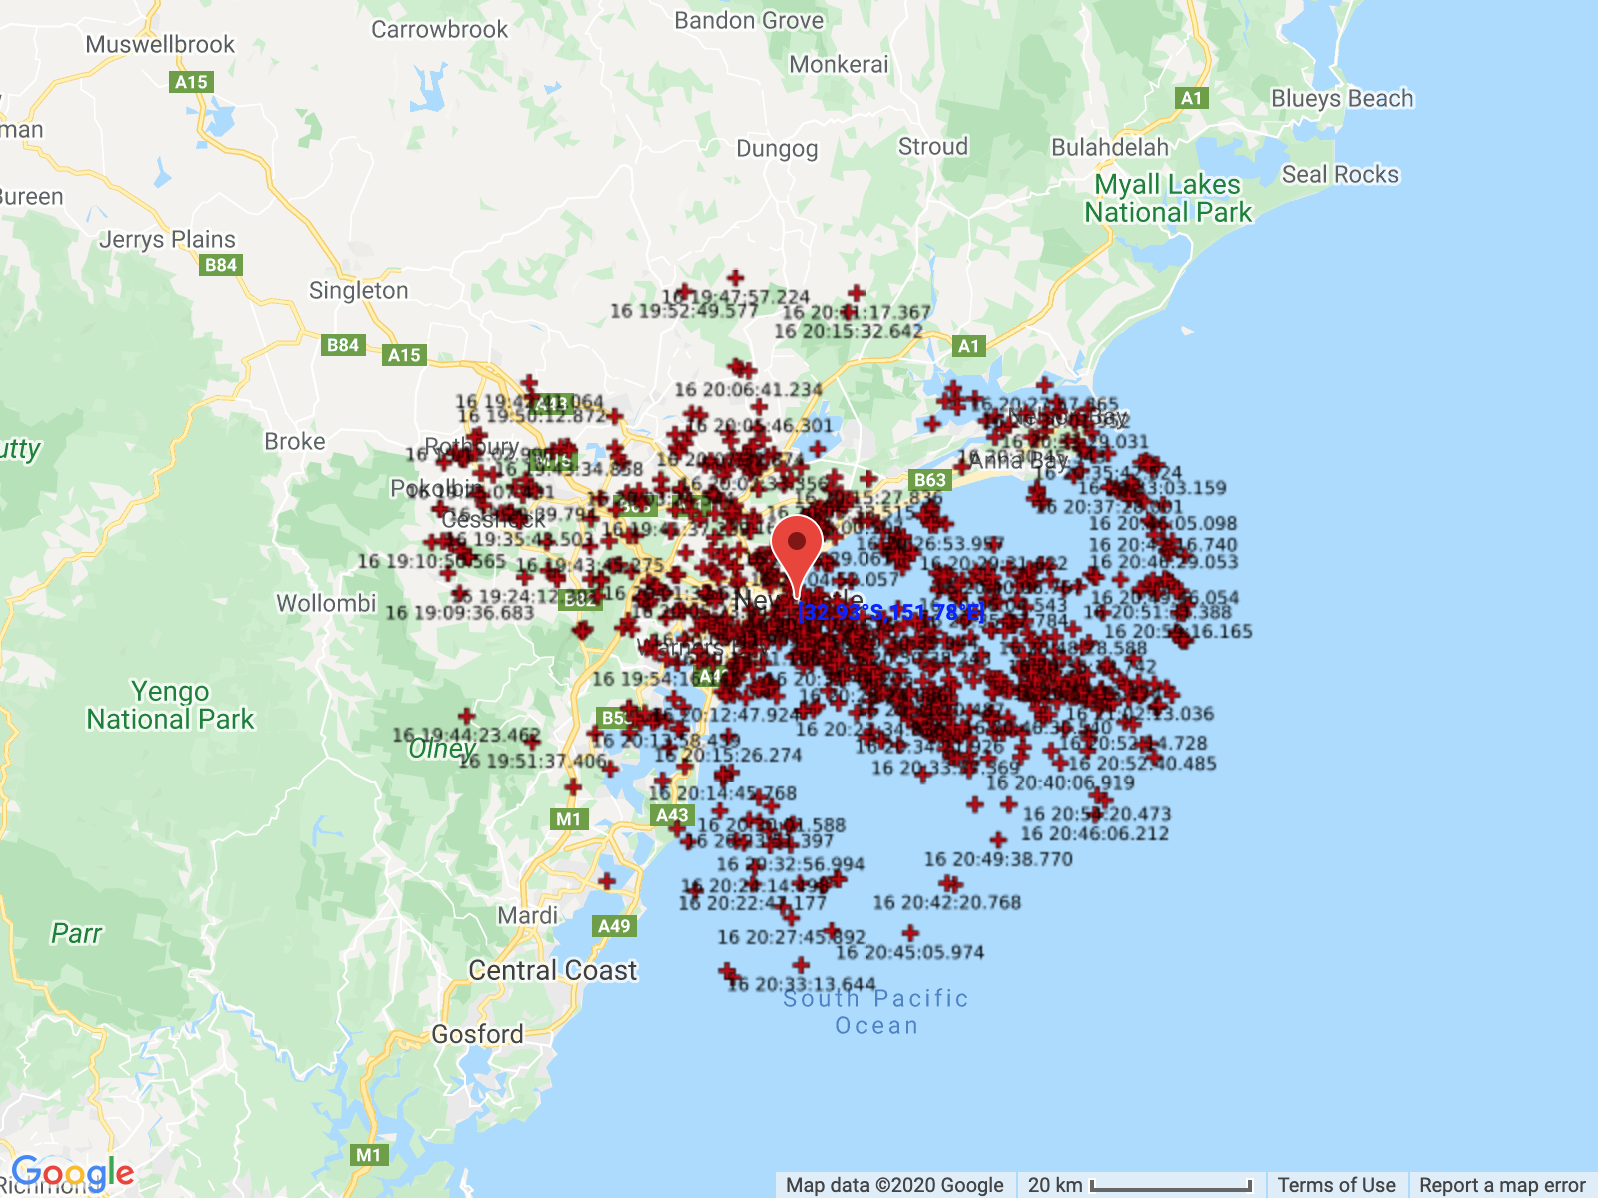 Newcastle hit by storm with a thousand strikes (and one hell of a wind gust)